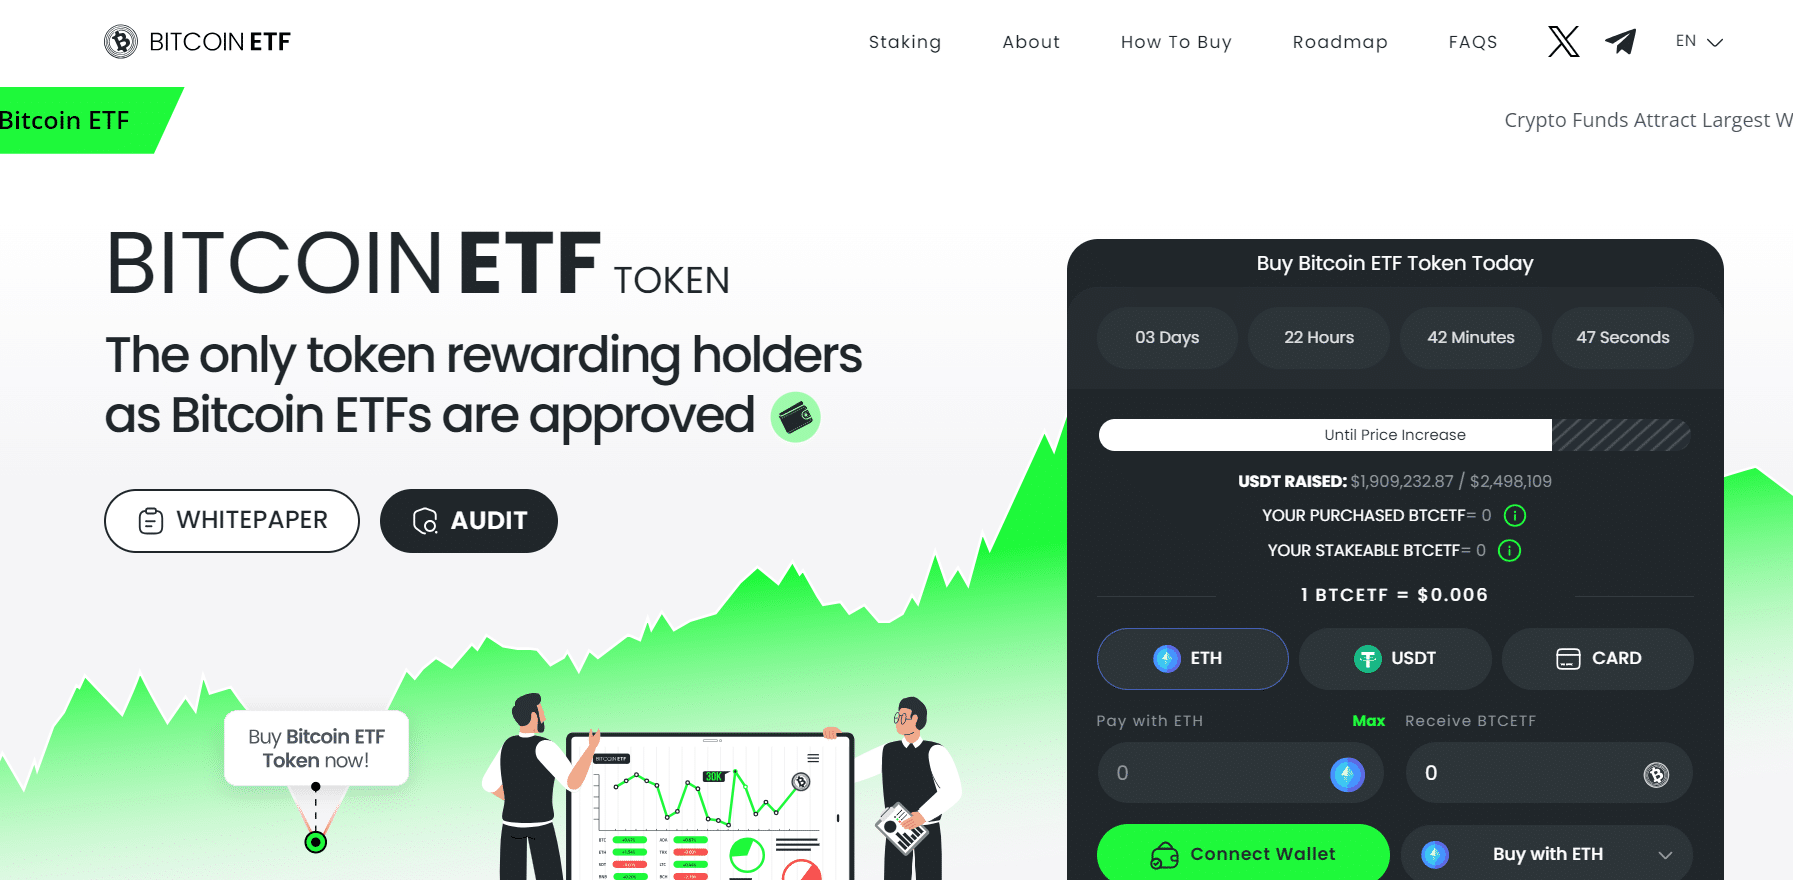 Bitcoin ETF Token best penny cryptocurrency